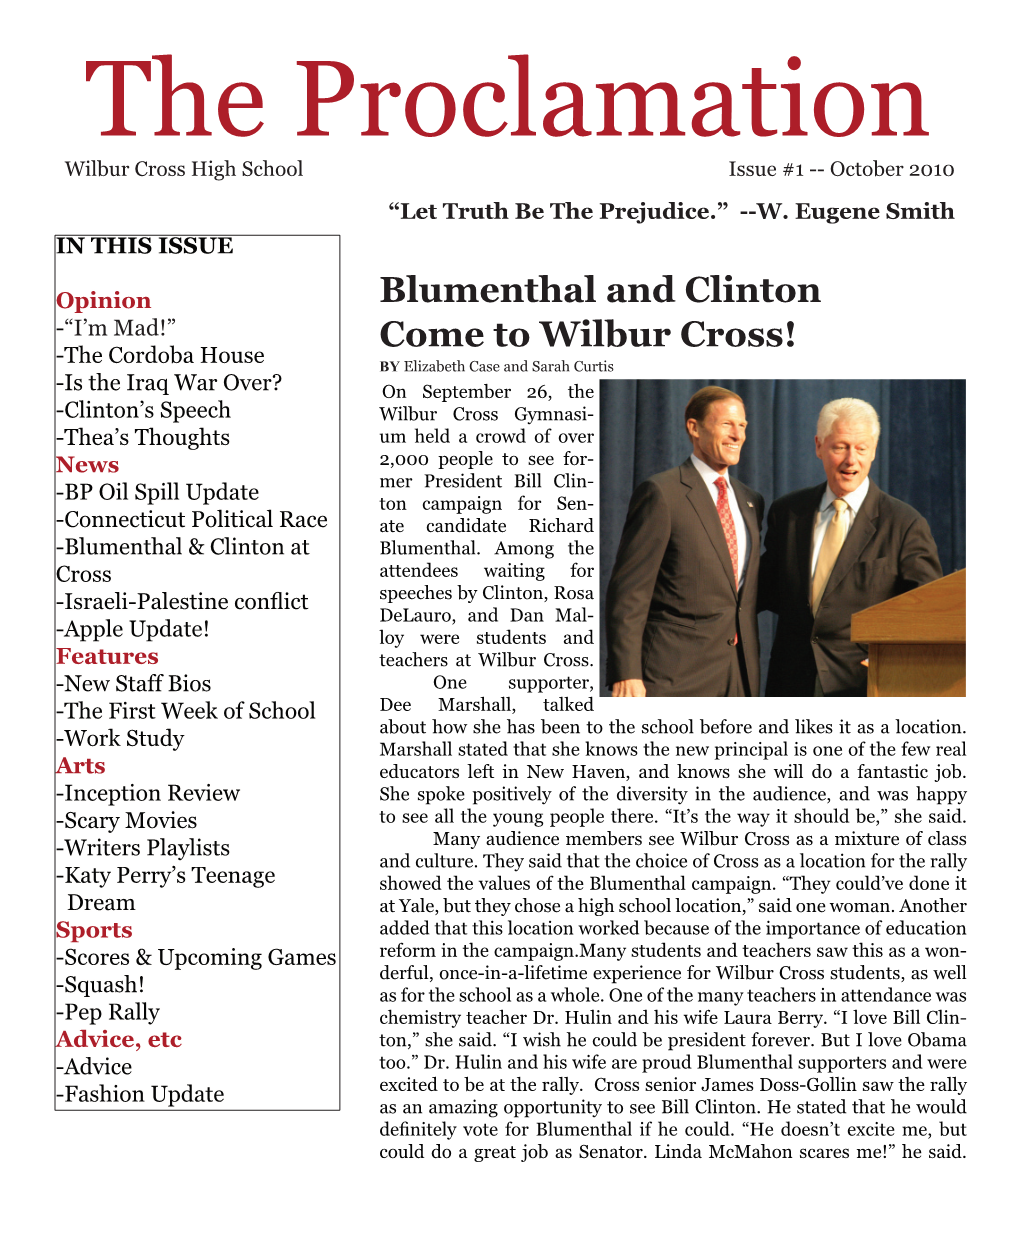 Blumenthal and Clinton Come to Wilbur Cross!